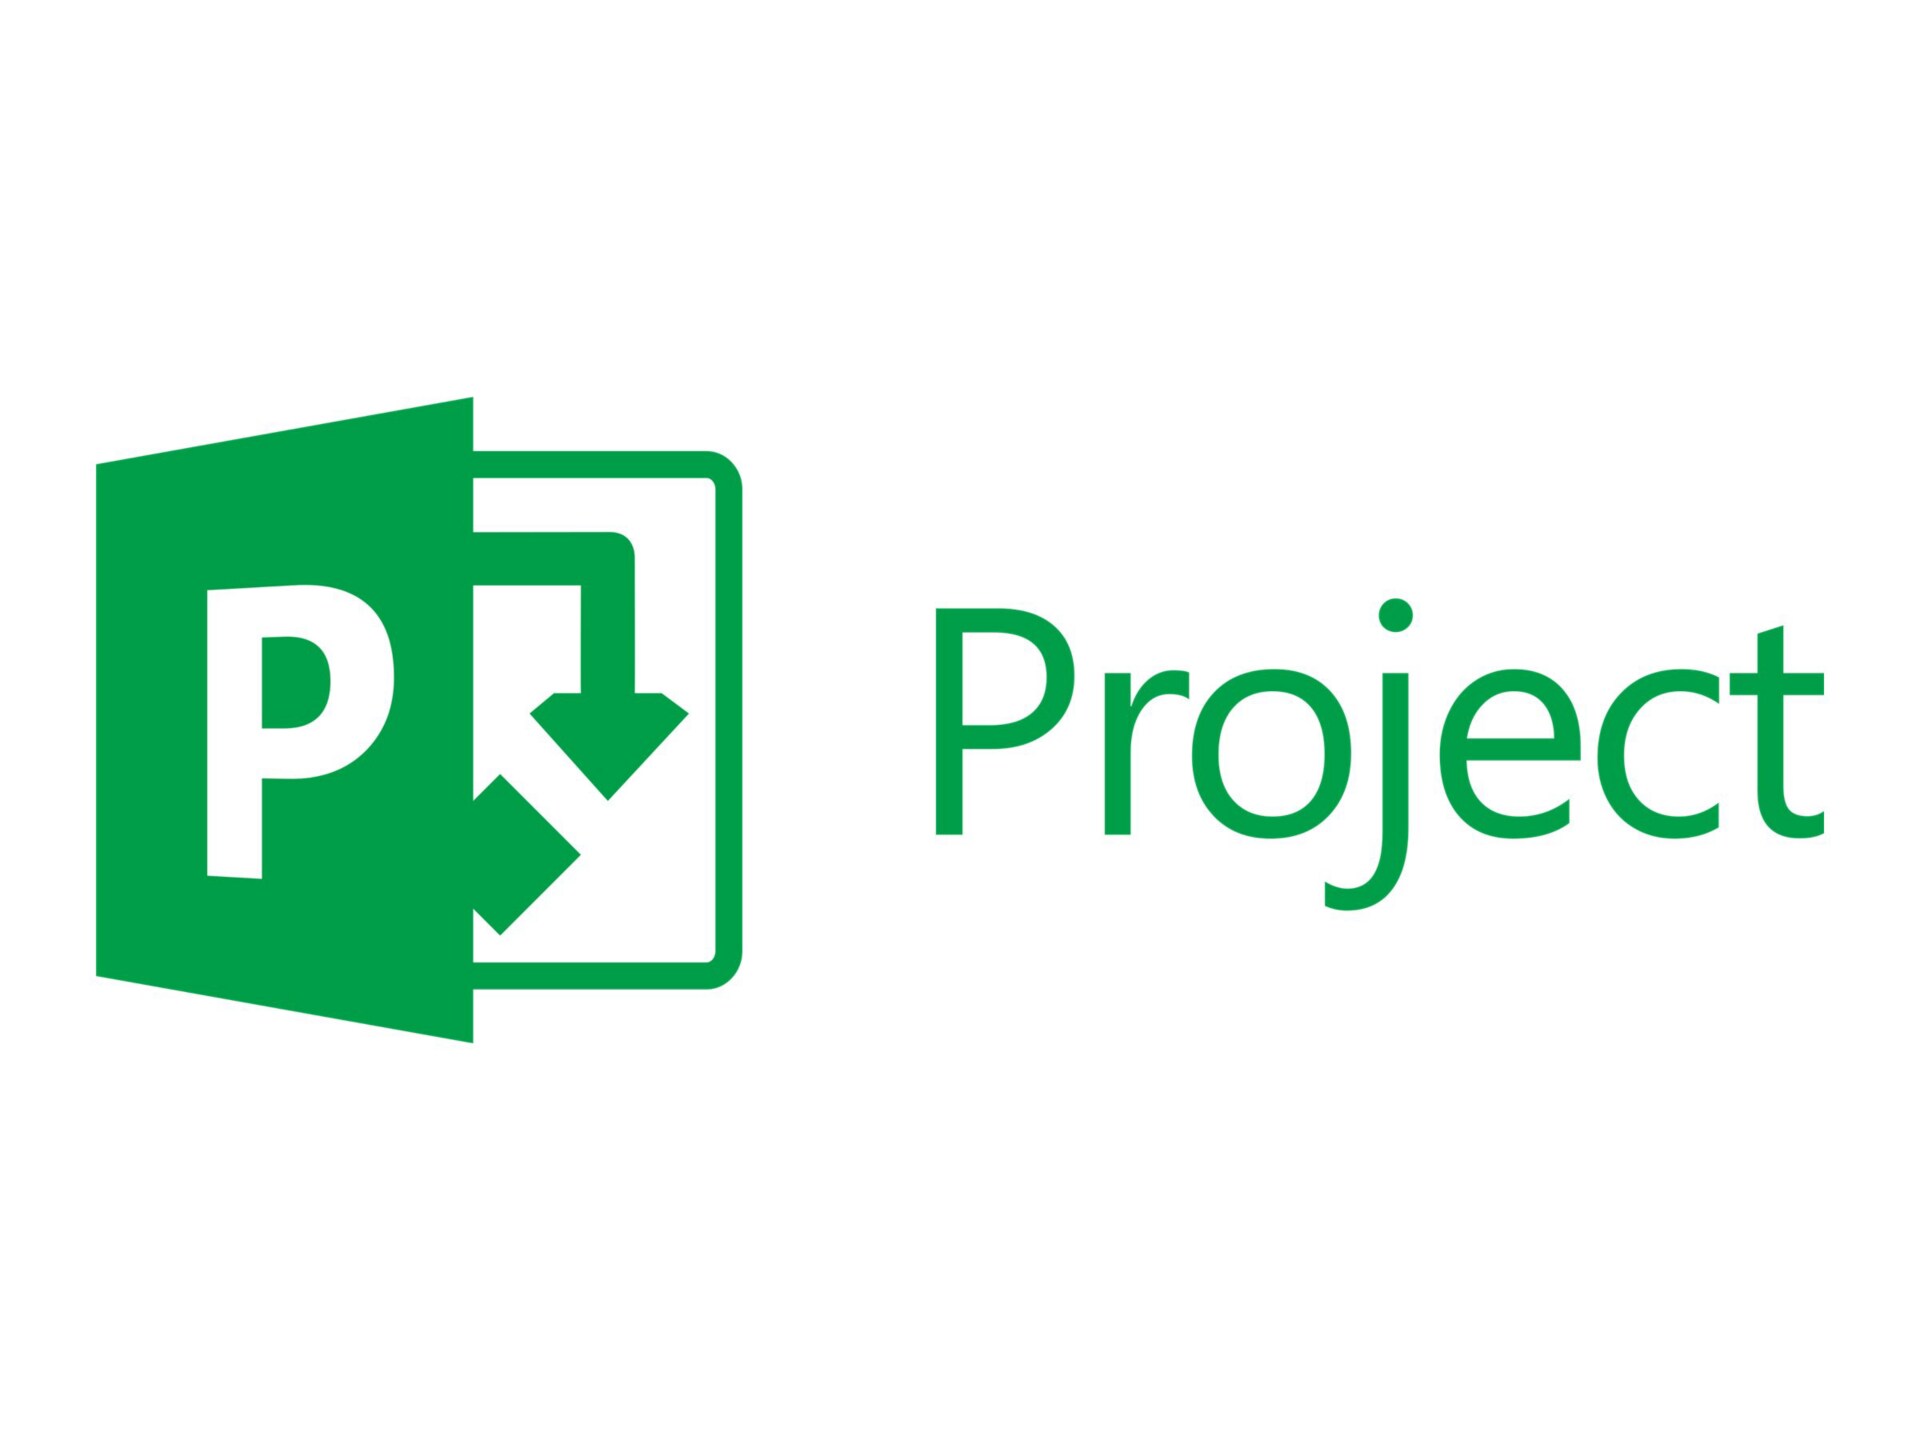 Microsoft Project Plan 5 - subscription license - 1 license